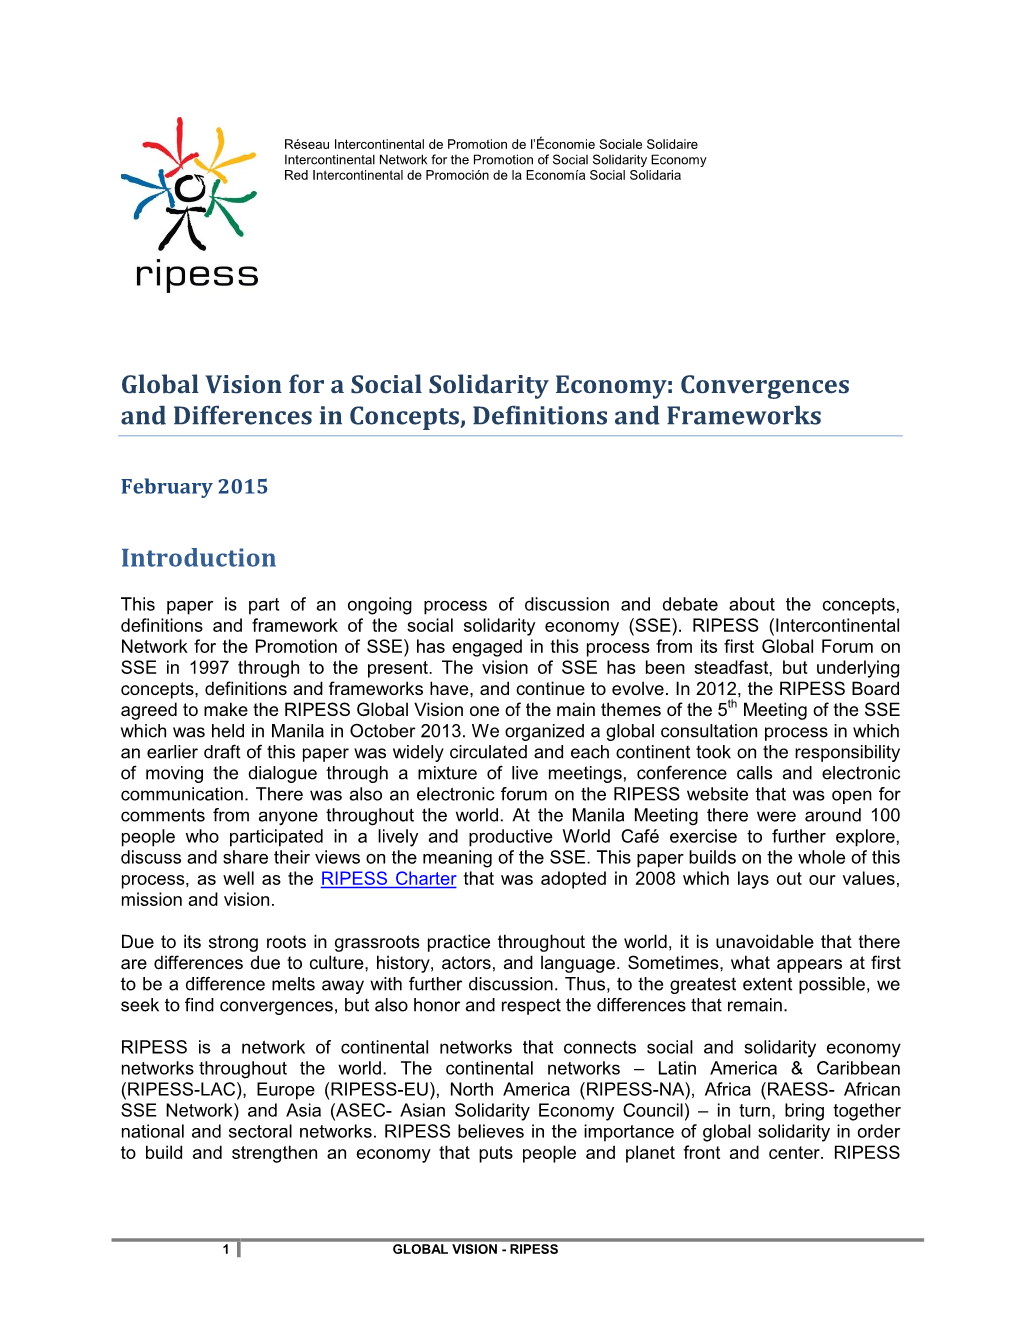 Global Vision for a Social Solidarity Economy: Convergences and Differences in Concepts, Definitions and Frameworks